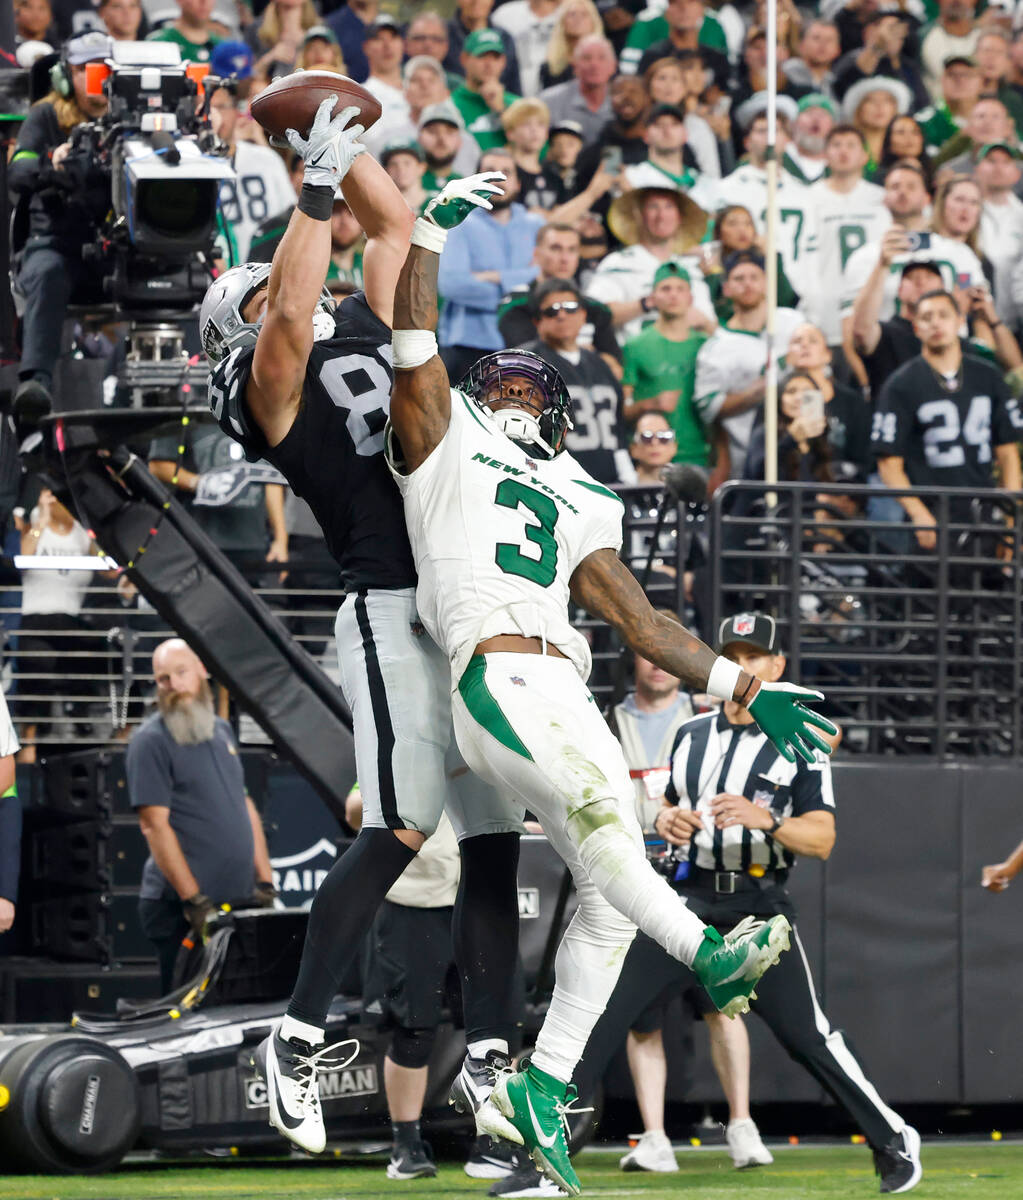 Raiders tight end Michael Mayer (87) catches a touchdown pass as New York Jets safety Jordan Wh ...